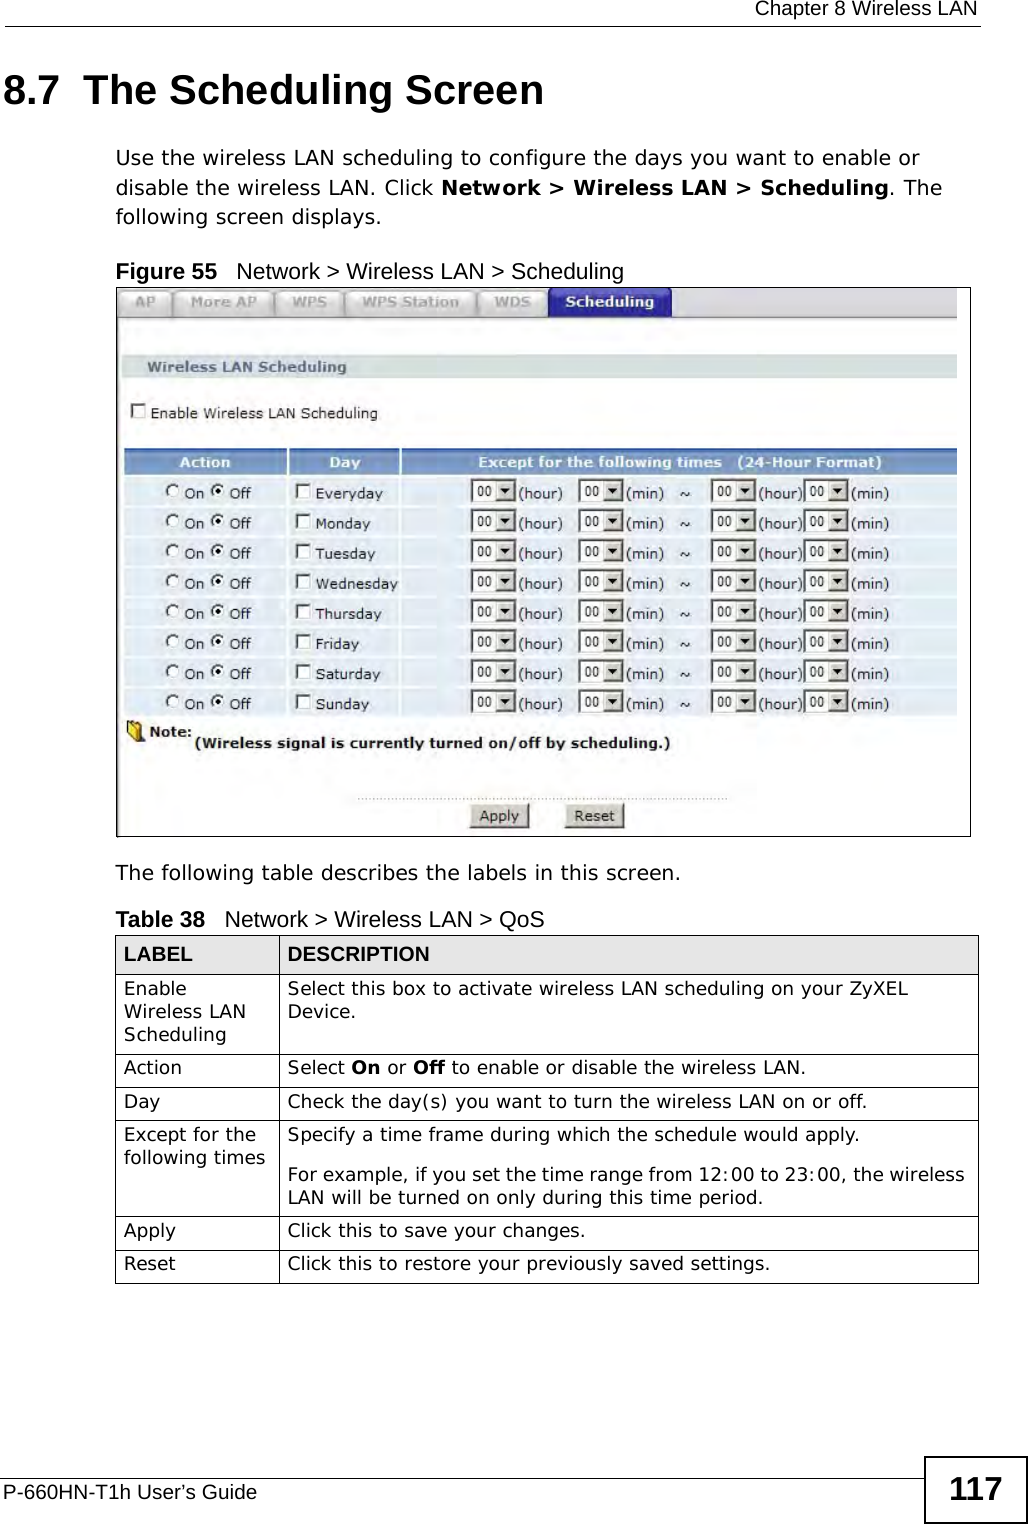  Chapter 8 Wireless LANP-660HN-T1h User’s Guide 1178.7  The Scheduling ScreenUse the wireless LAN scheduling to configure the days you want to enable or disable the wireless LAN. Click Network &gt; Wireless LAN &gt; Scheduling. The following screen displays.Figure 55   Network &gt; Wireless LAN &gt; SchedulingThe following table describes the labels in this screen.Table 38   Network &gt; Wireless LAN &gt; QoSLABEL DESCRIPTIONEnable Wireless LAN SchedulingSelect this box to activate wireless LAN scheduling on your ZyXEL Device.Action Select On or Off to enable or disable the wireless LAN.Day Check the day(s) you want to turn the wireless LAN on or off.Except for the following times Specify a time frame during which the schedule would apply.For example, if you set the time range from 12:00 to 23:00, the wireless LAN will be turned on only during this time period.Apply Click this to save your changes.Reset Click this to restore your previously saved settings.